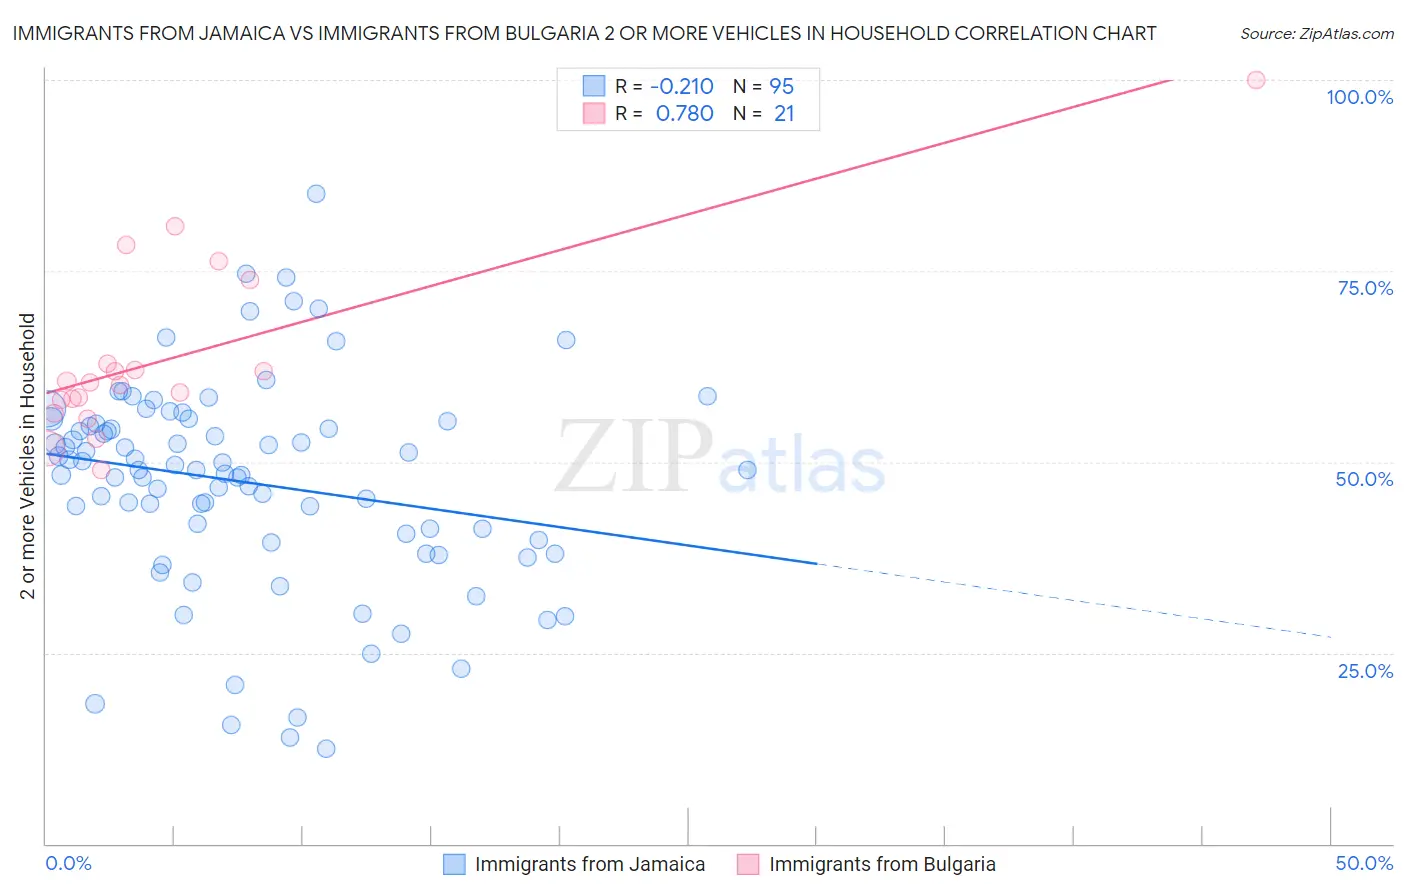 Immigrants from Jamaica vs Immigrants from Bulgaria 2 or more Vehicles in Household